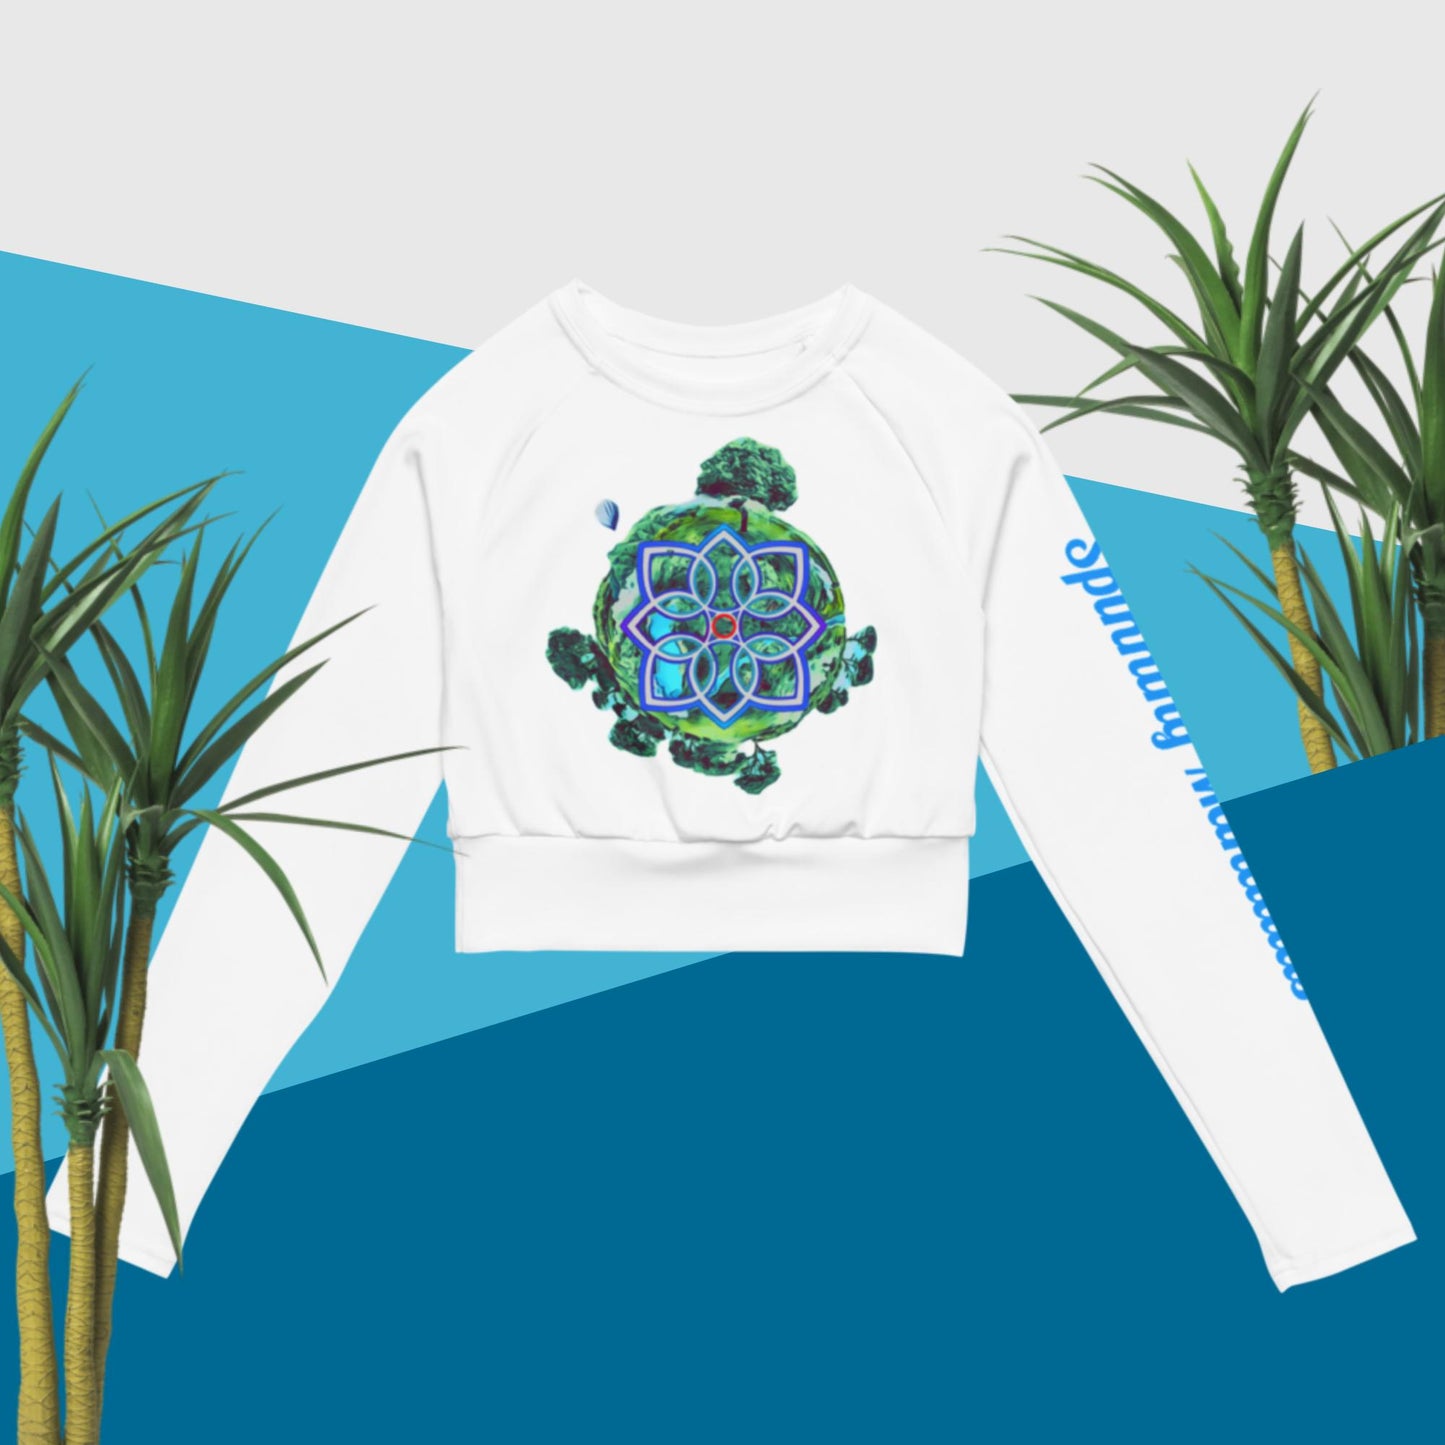 Small World Recycled long-sleeve crop top